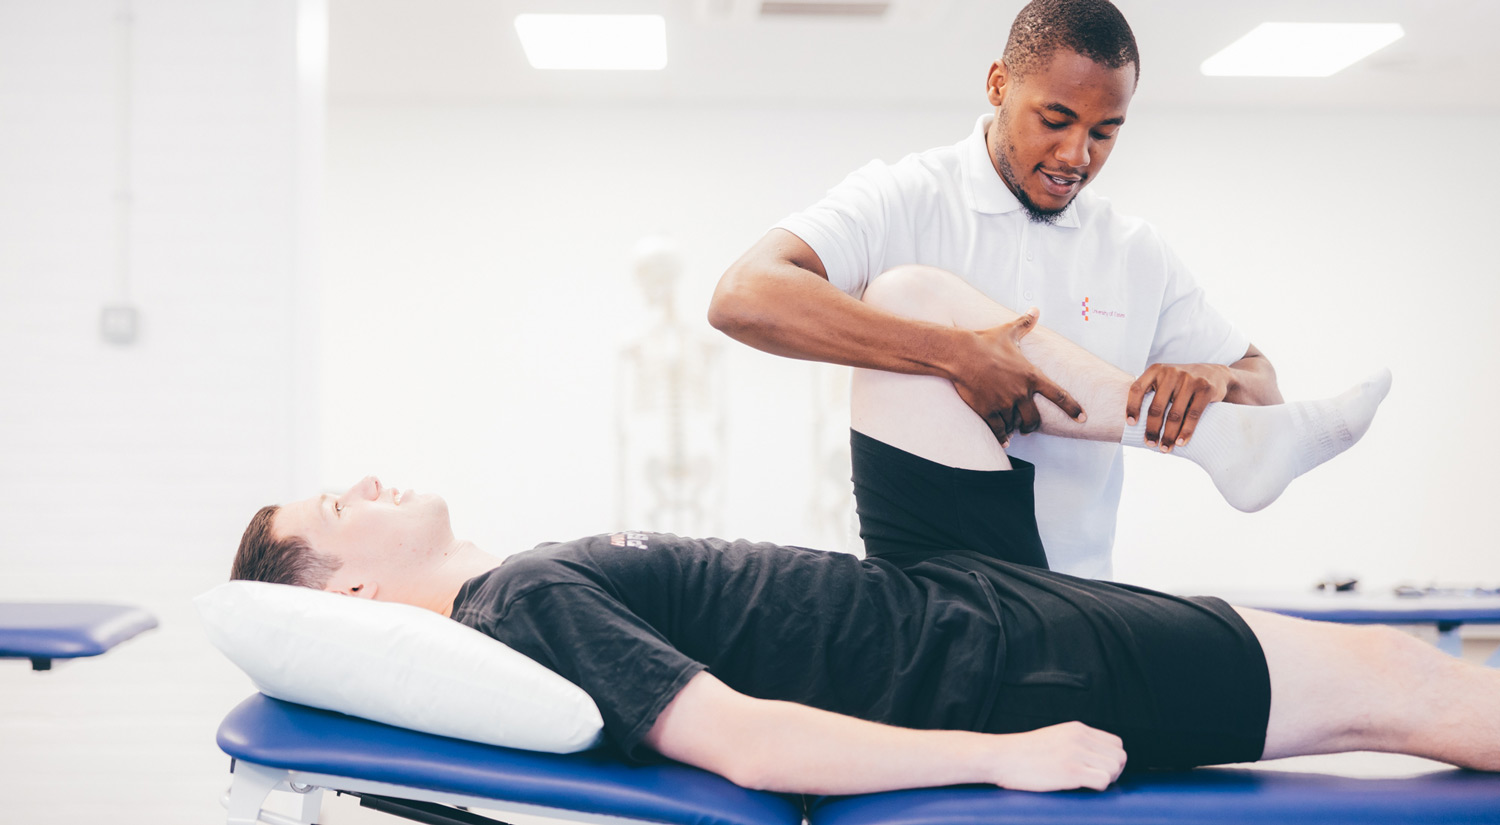 Physiotherapy student practicising techniques with another student